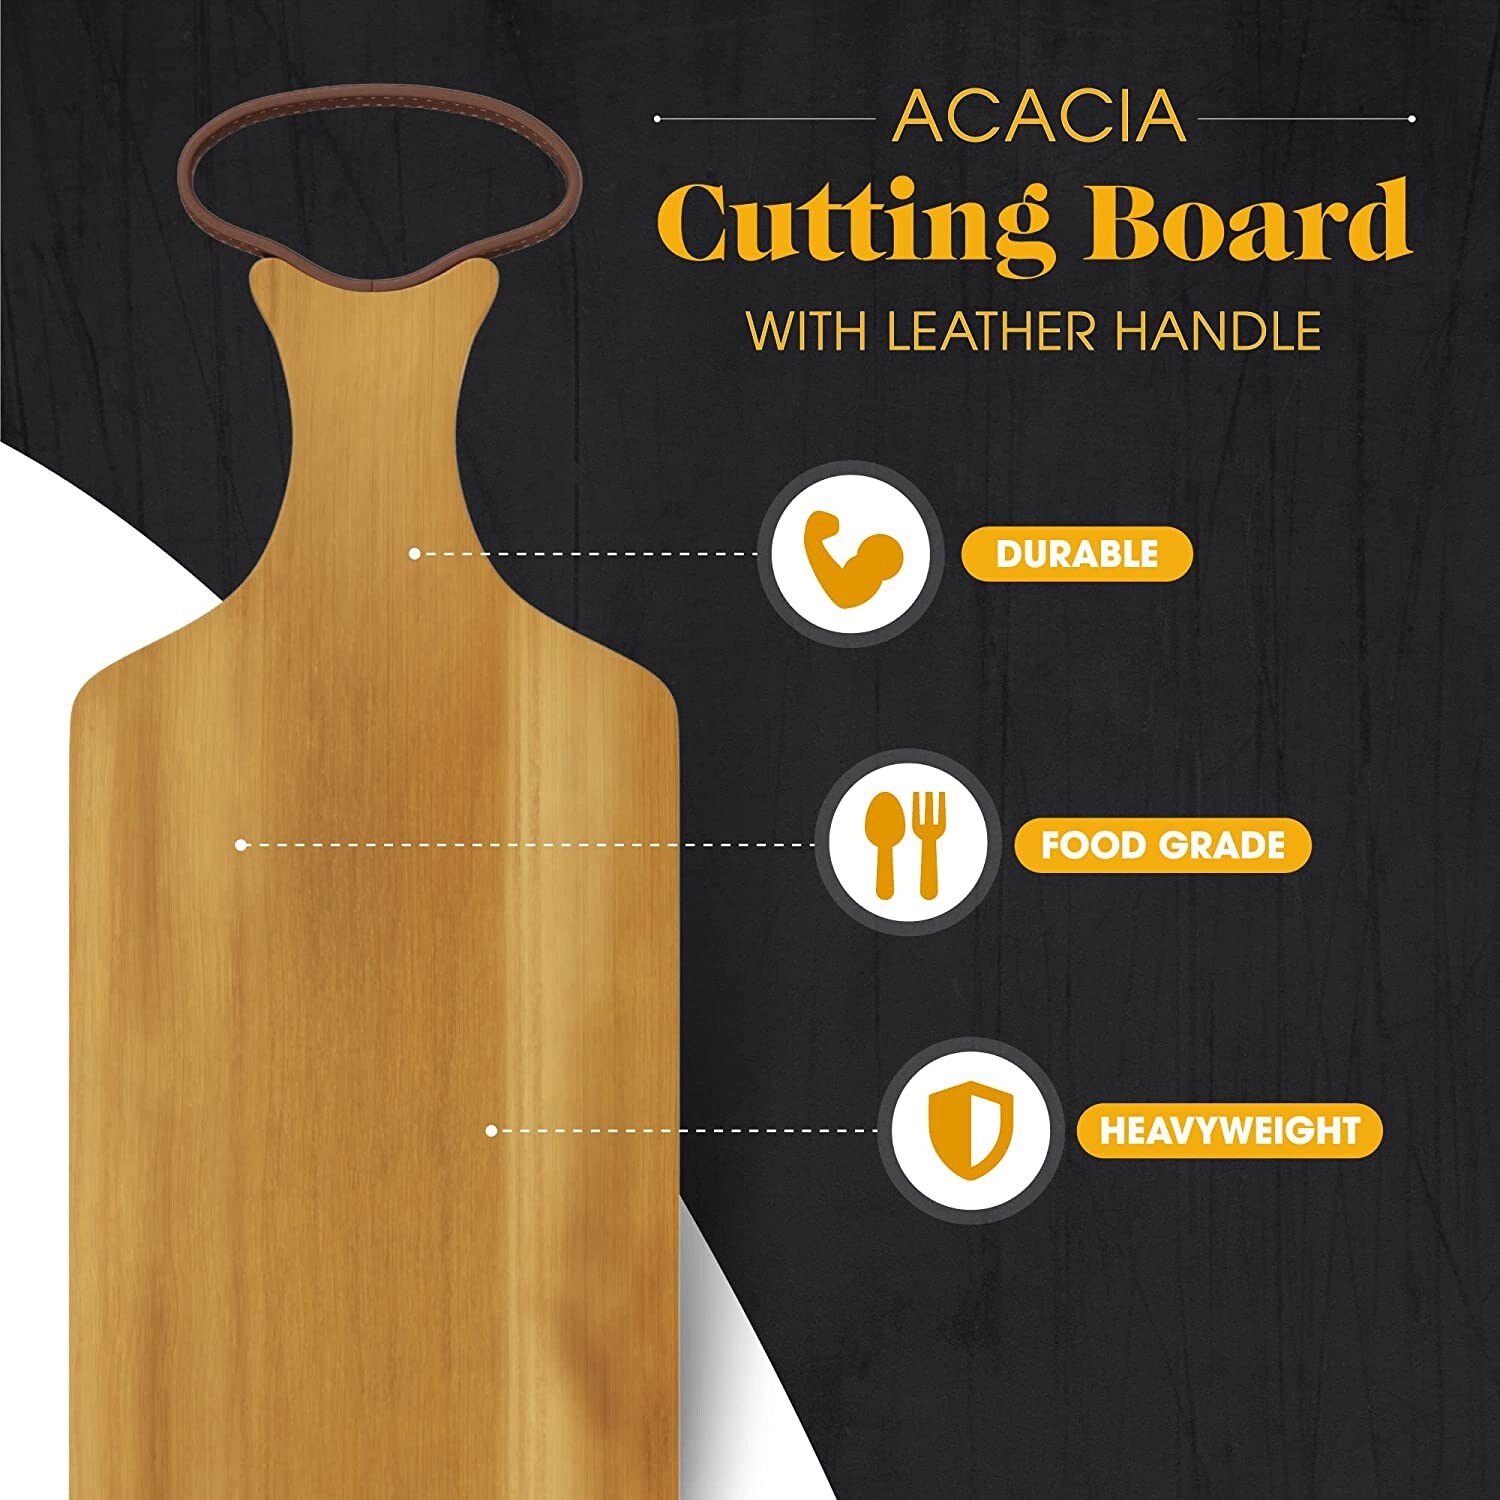 https://ak1.ostkcdn.com/images/products/is/images/direct/995a94402857914188d06b8bea5b7a8f9f4431f8/American-Atelier-Acacia-Wood-Cutting-Board-with-Leather-Handle.jpg